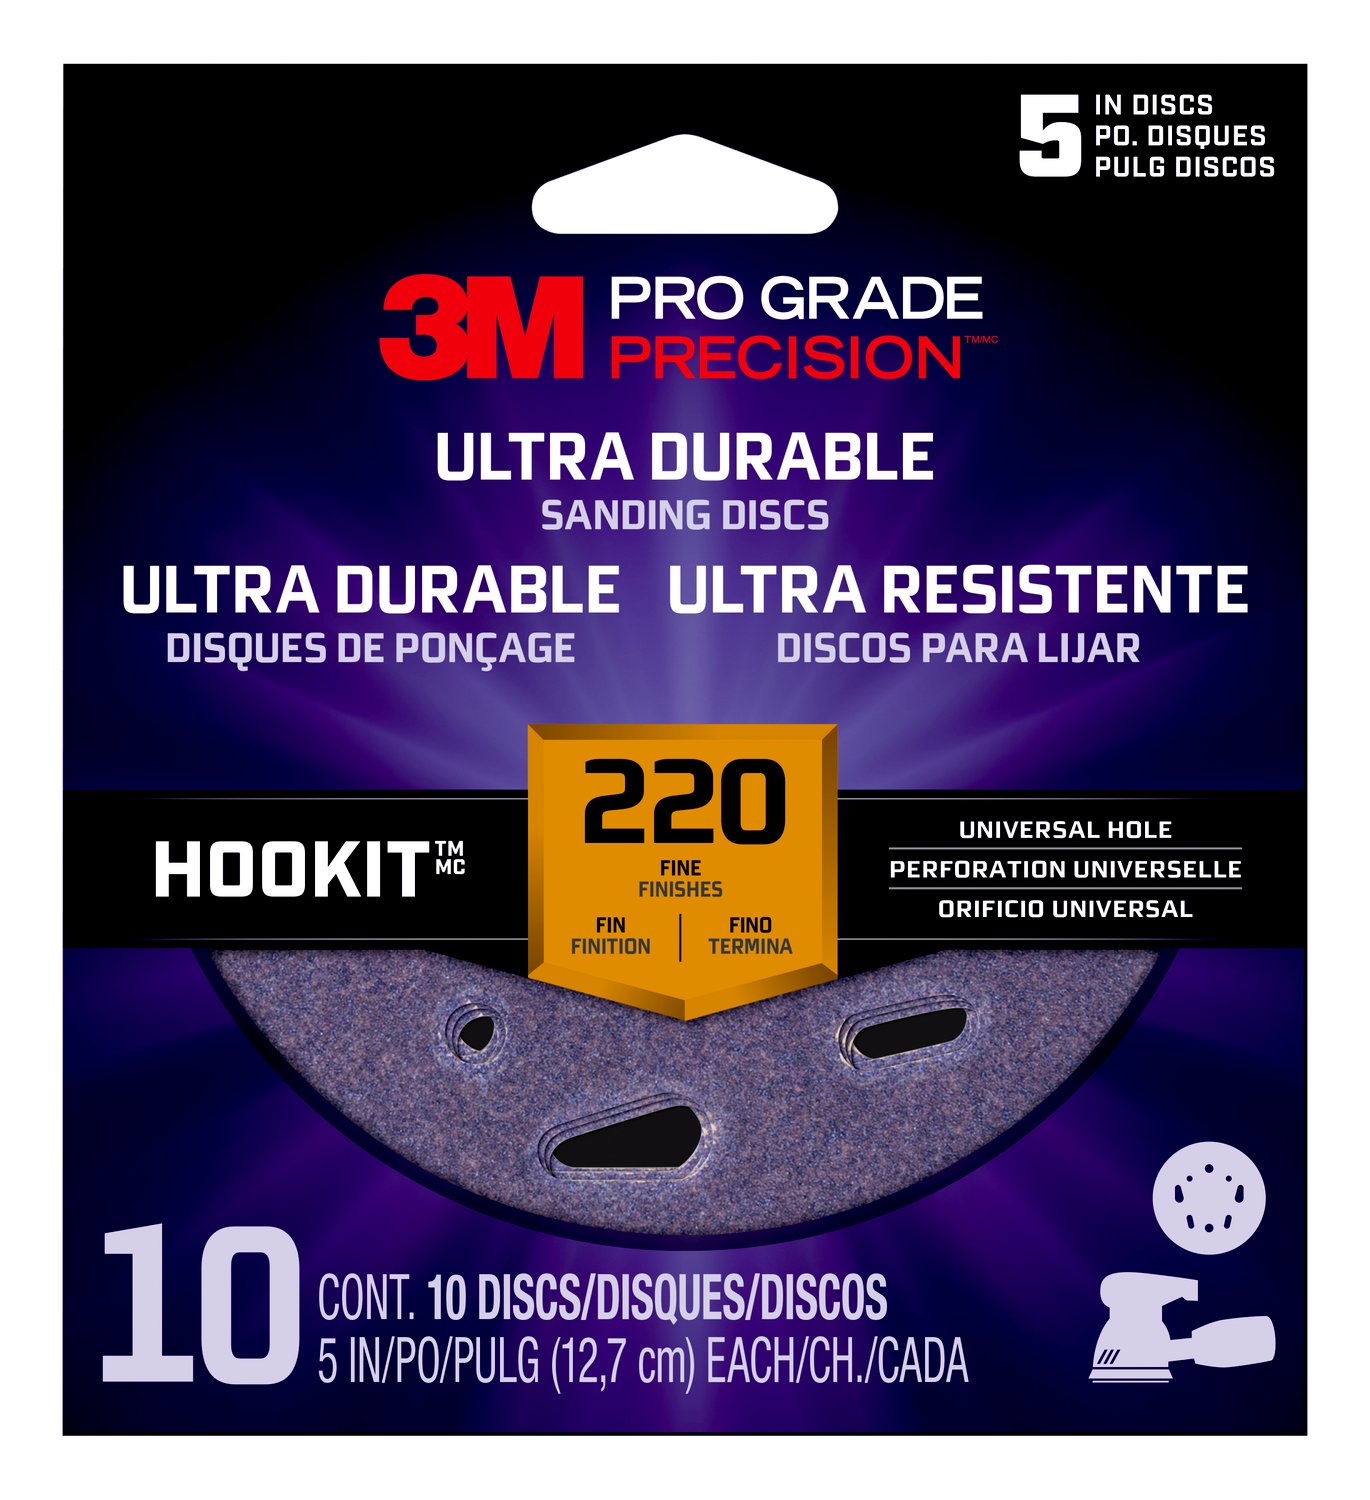 7100202880 - 3M Pro Grade Precision Ultra Durable Universal Hole Sanding Disc,
DUH5220TRI-10T, 5 IN x UH, 220, 10 pack